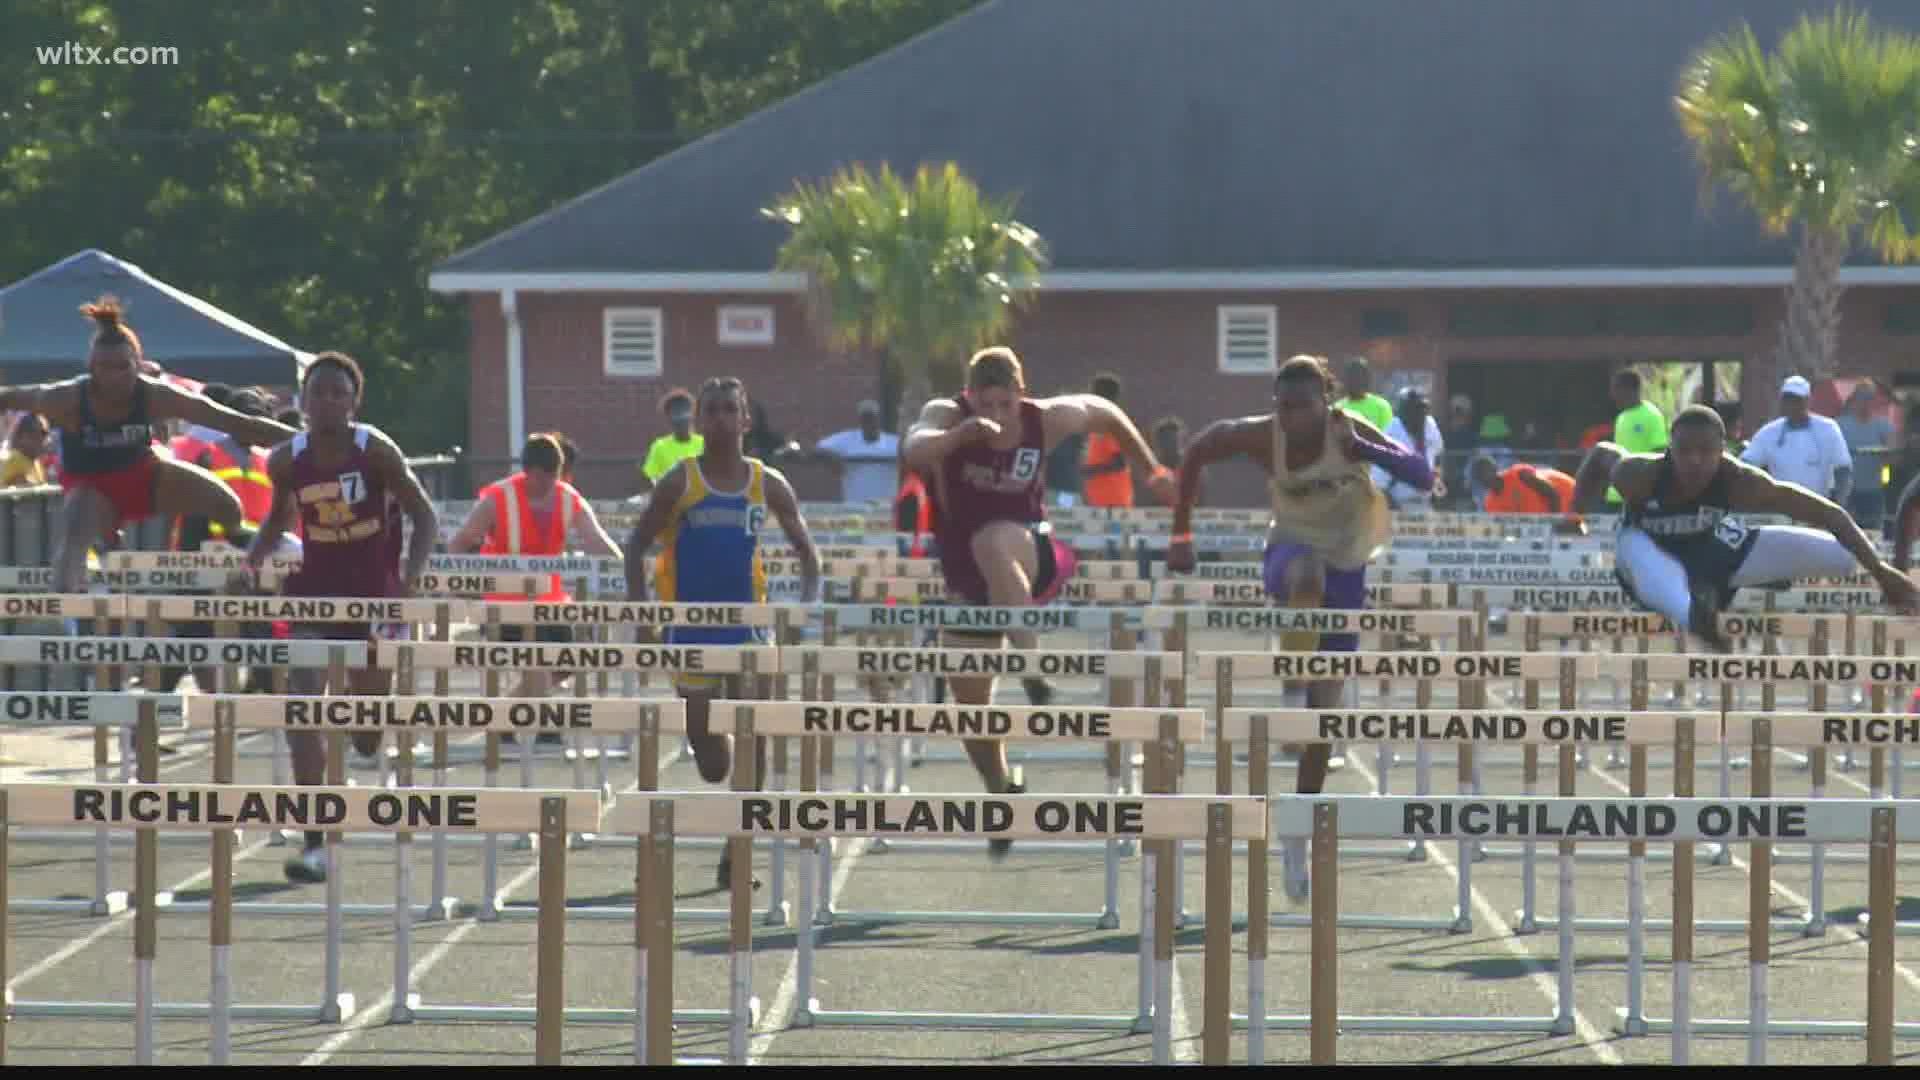 The South Carolina High School League is holding its track and field state championships this weekend.